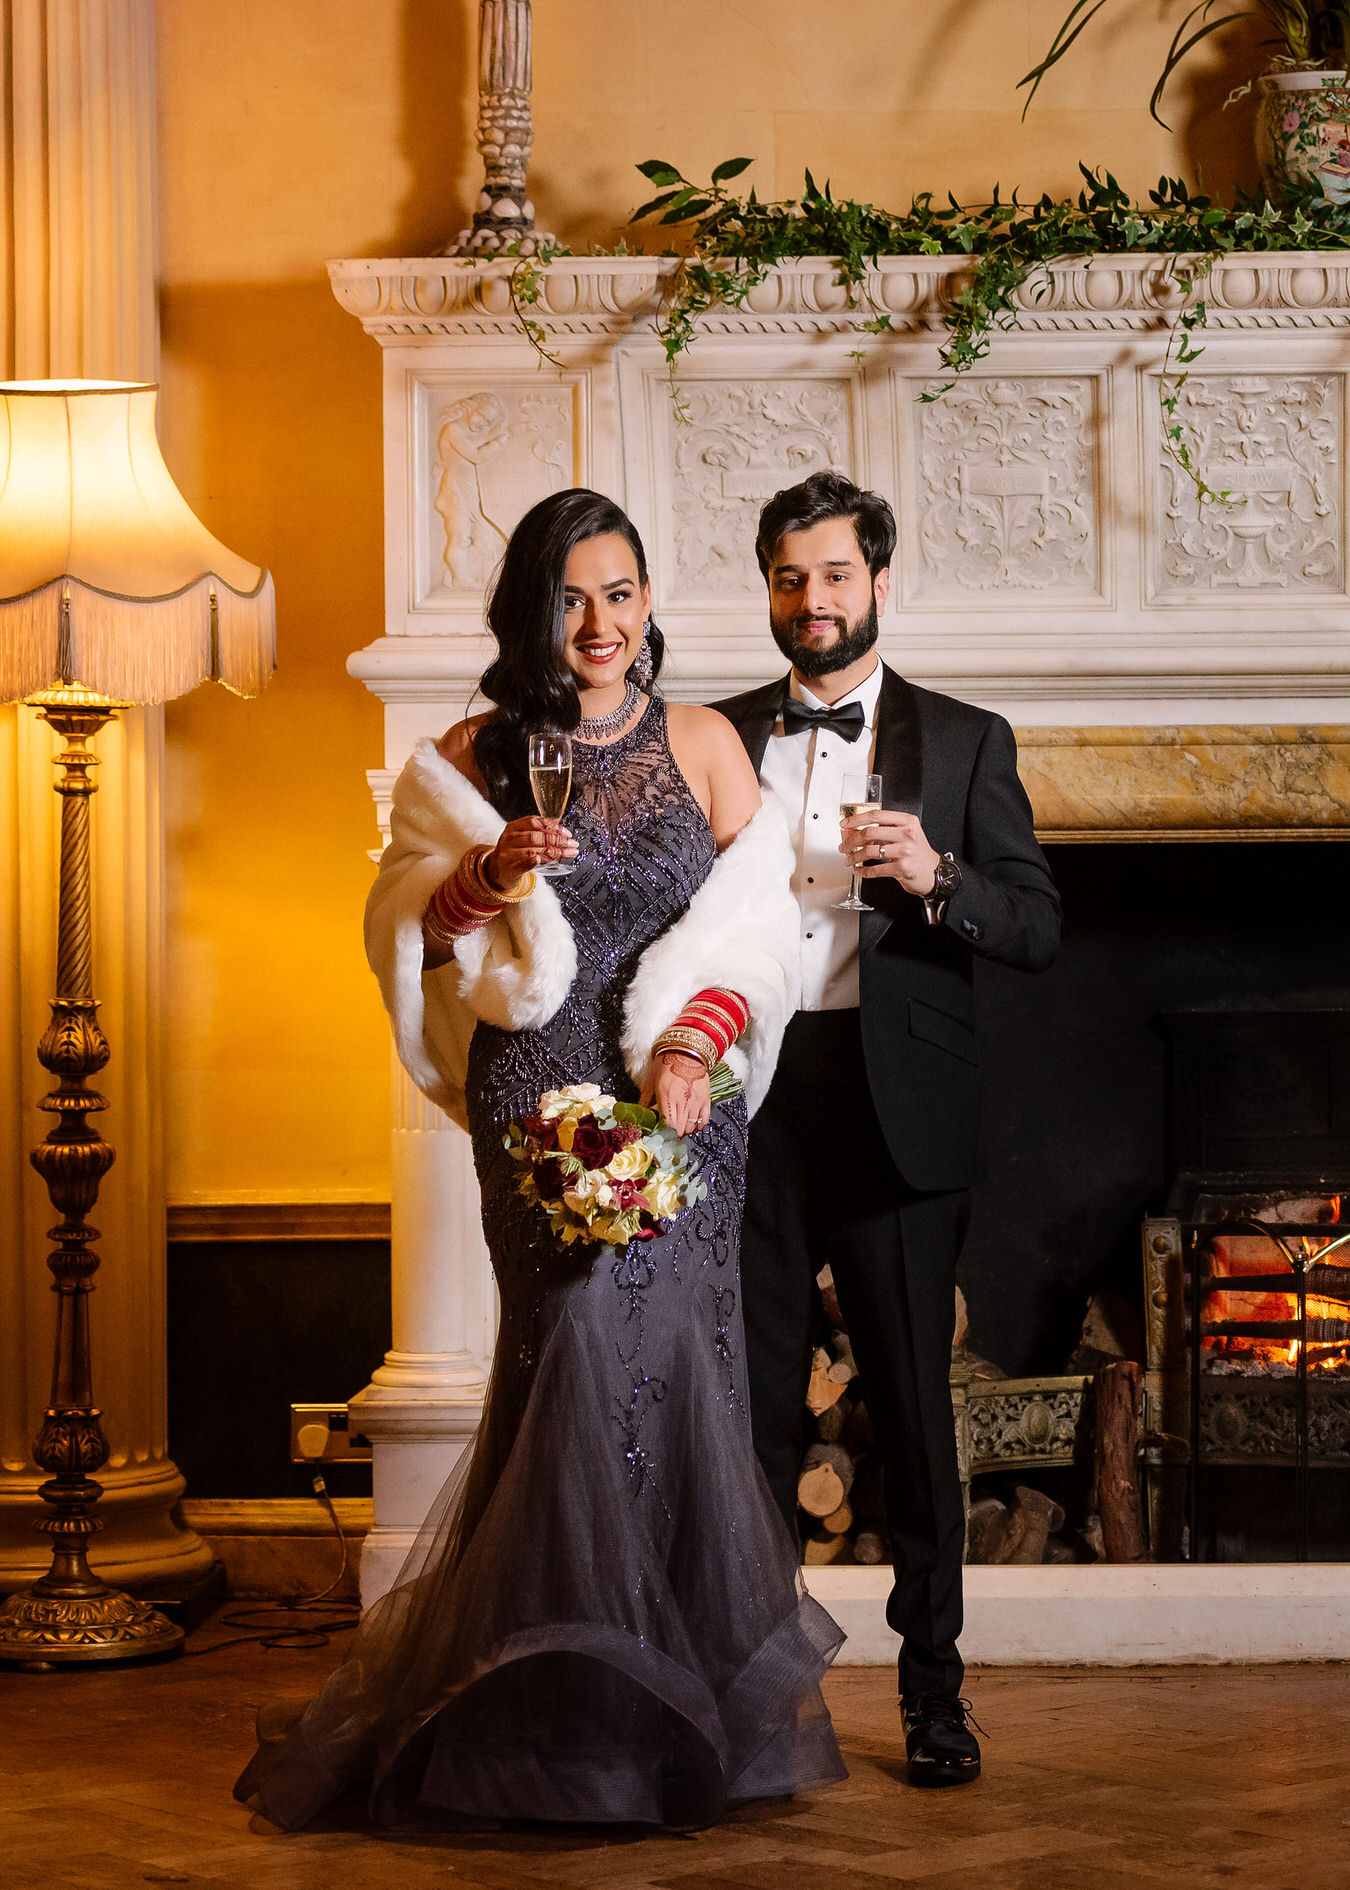 Asian wedding bride and groom with champagne glasses standing in front of the fireplace